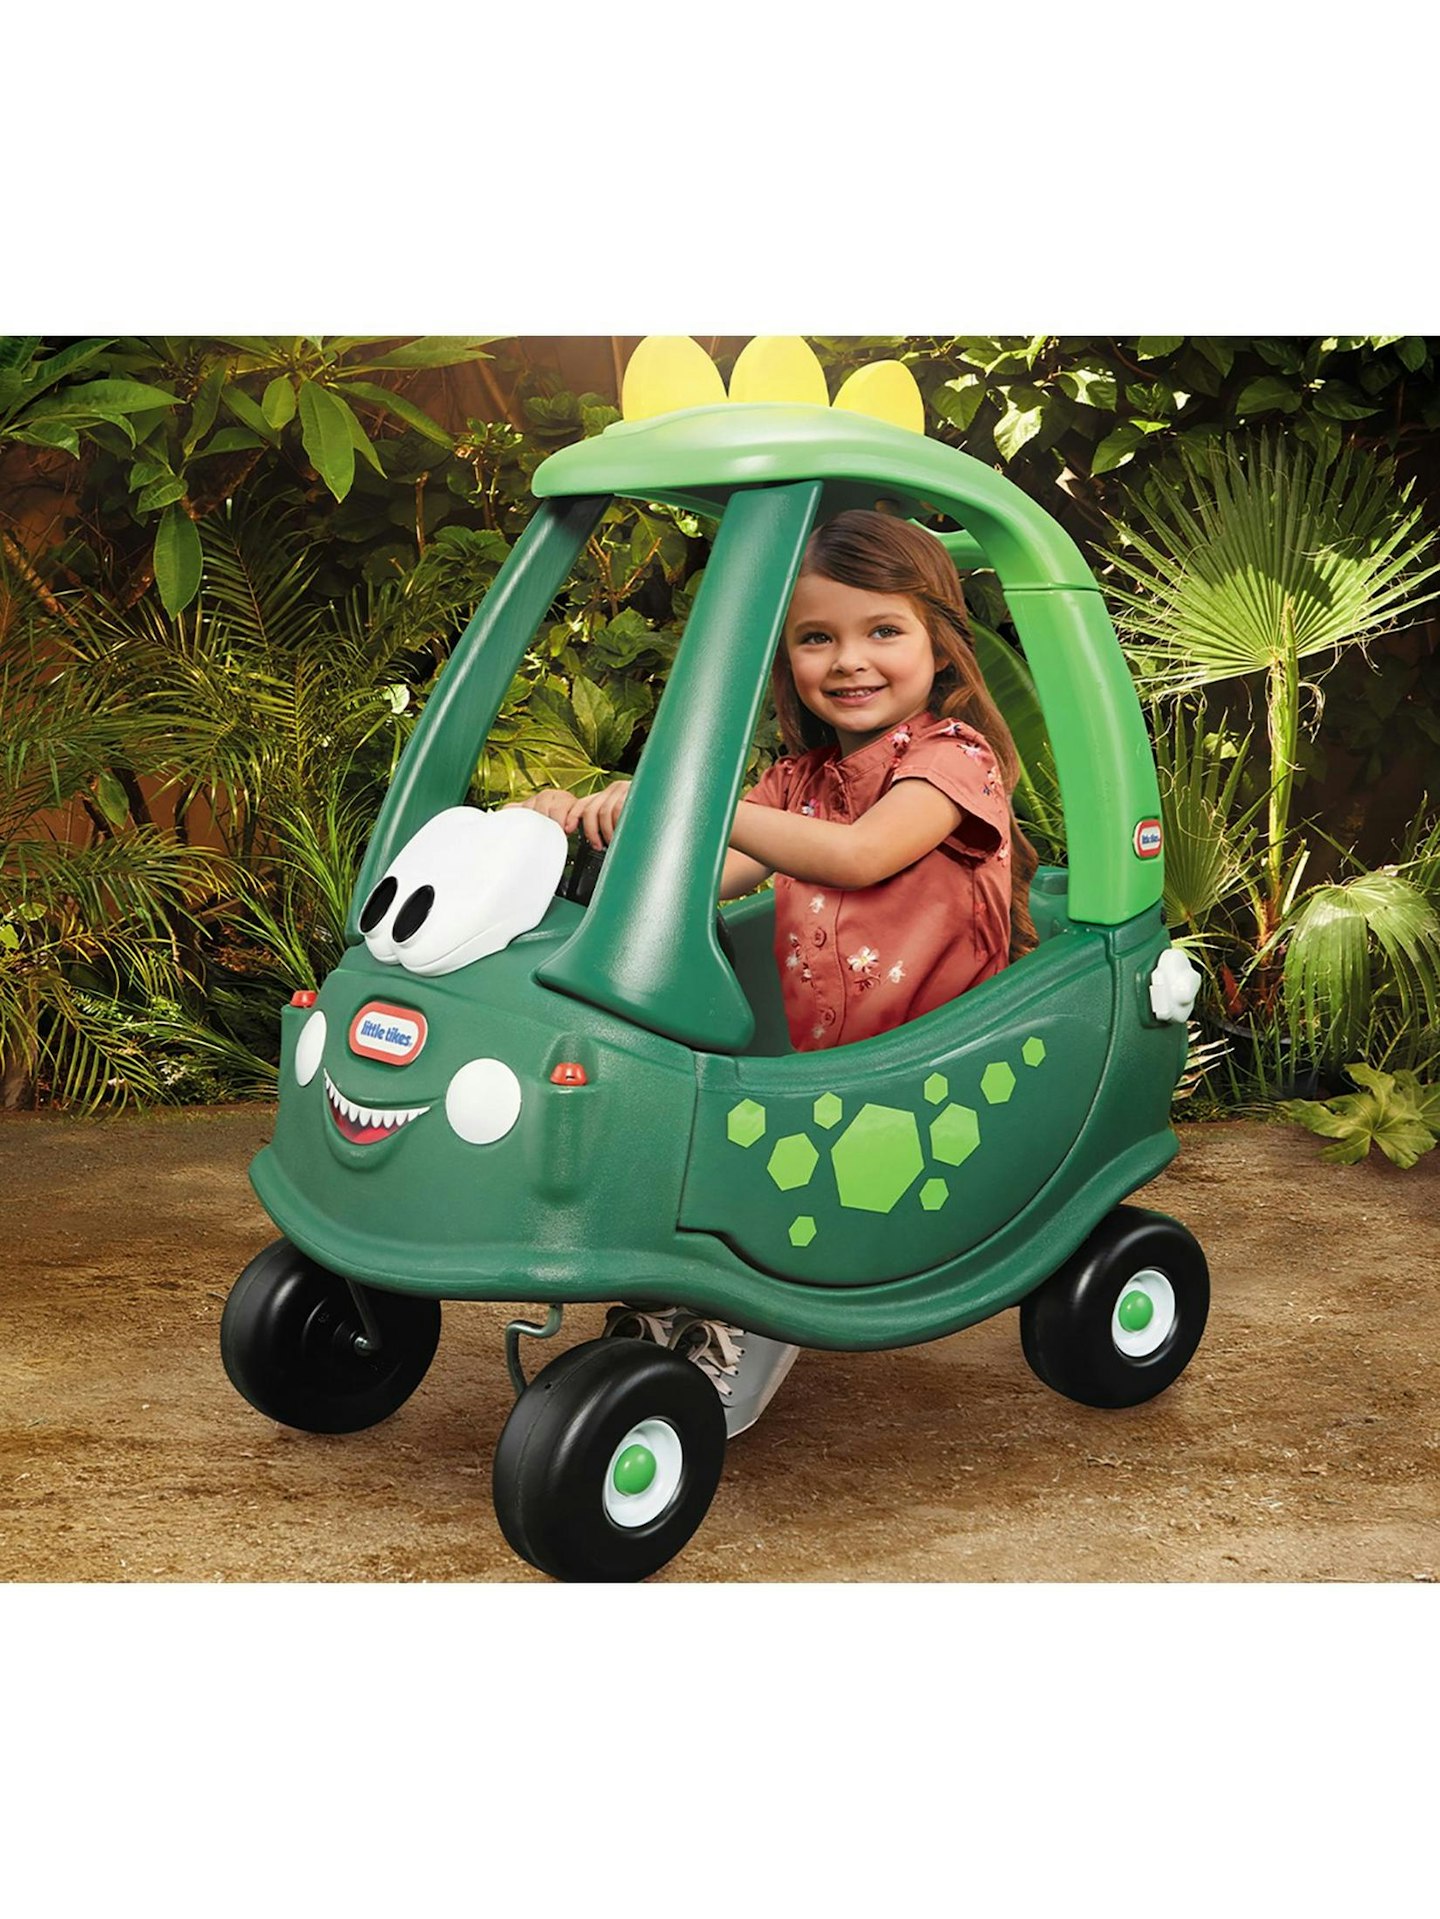 Little Tikes - Very Black Friday deals